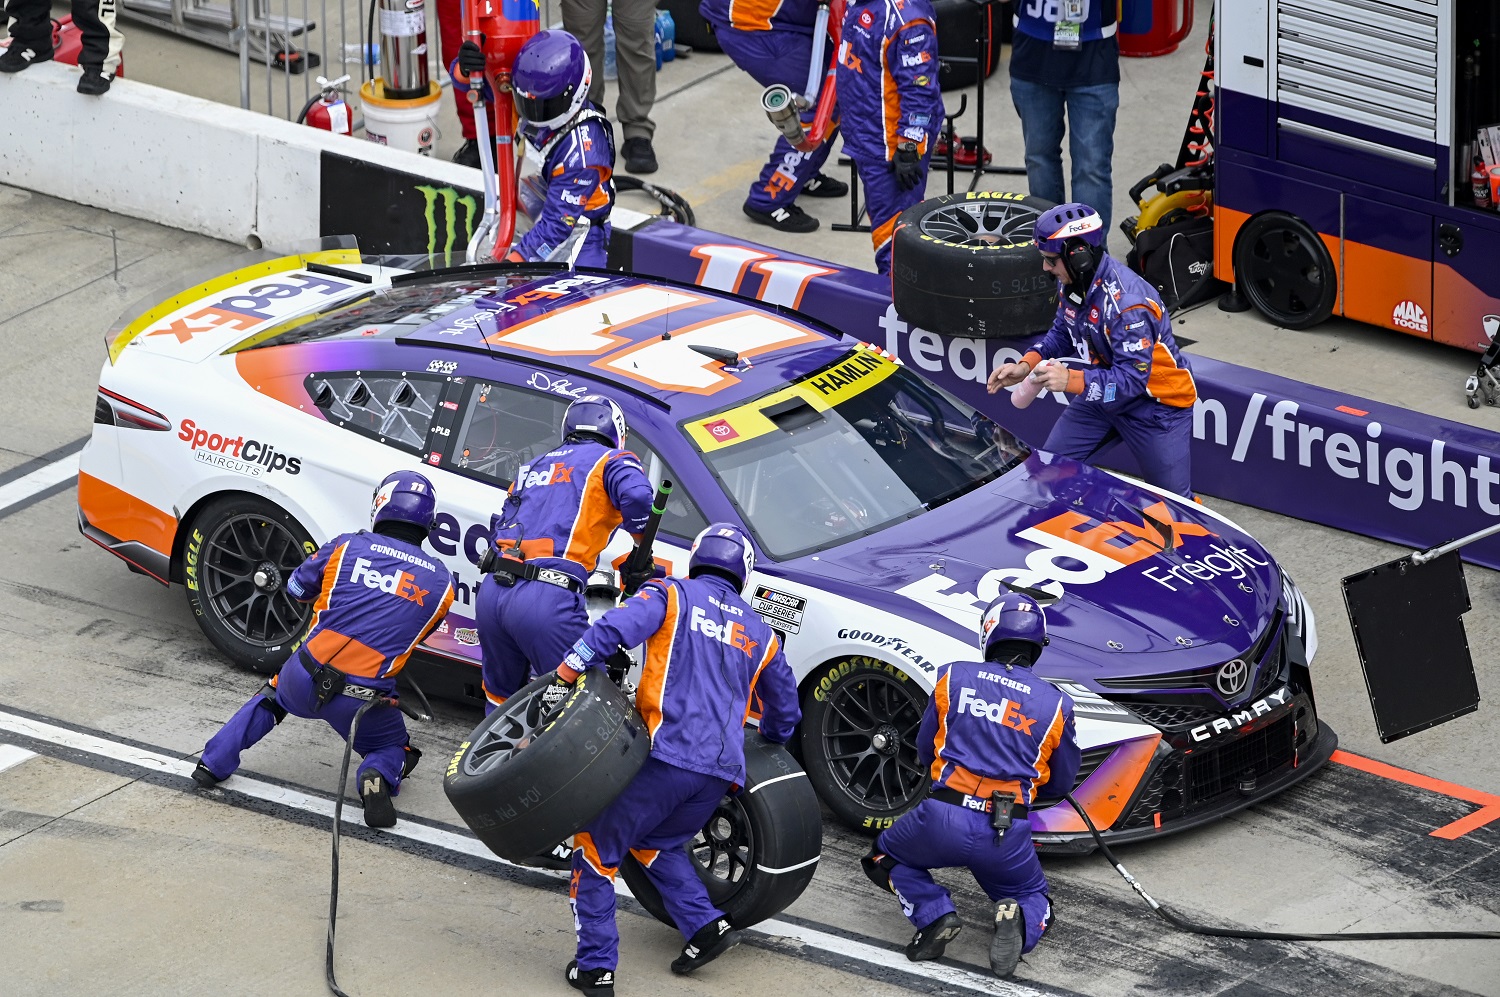 Denny Hamlin pits during the NASCAR Cup Series Xfinity 500 at Martinsville Speedway on Oct. 30, 2022 in Martinsville. | Eakin Howard/Getty Images